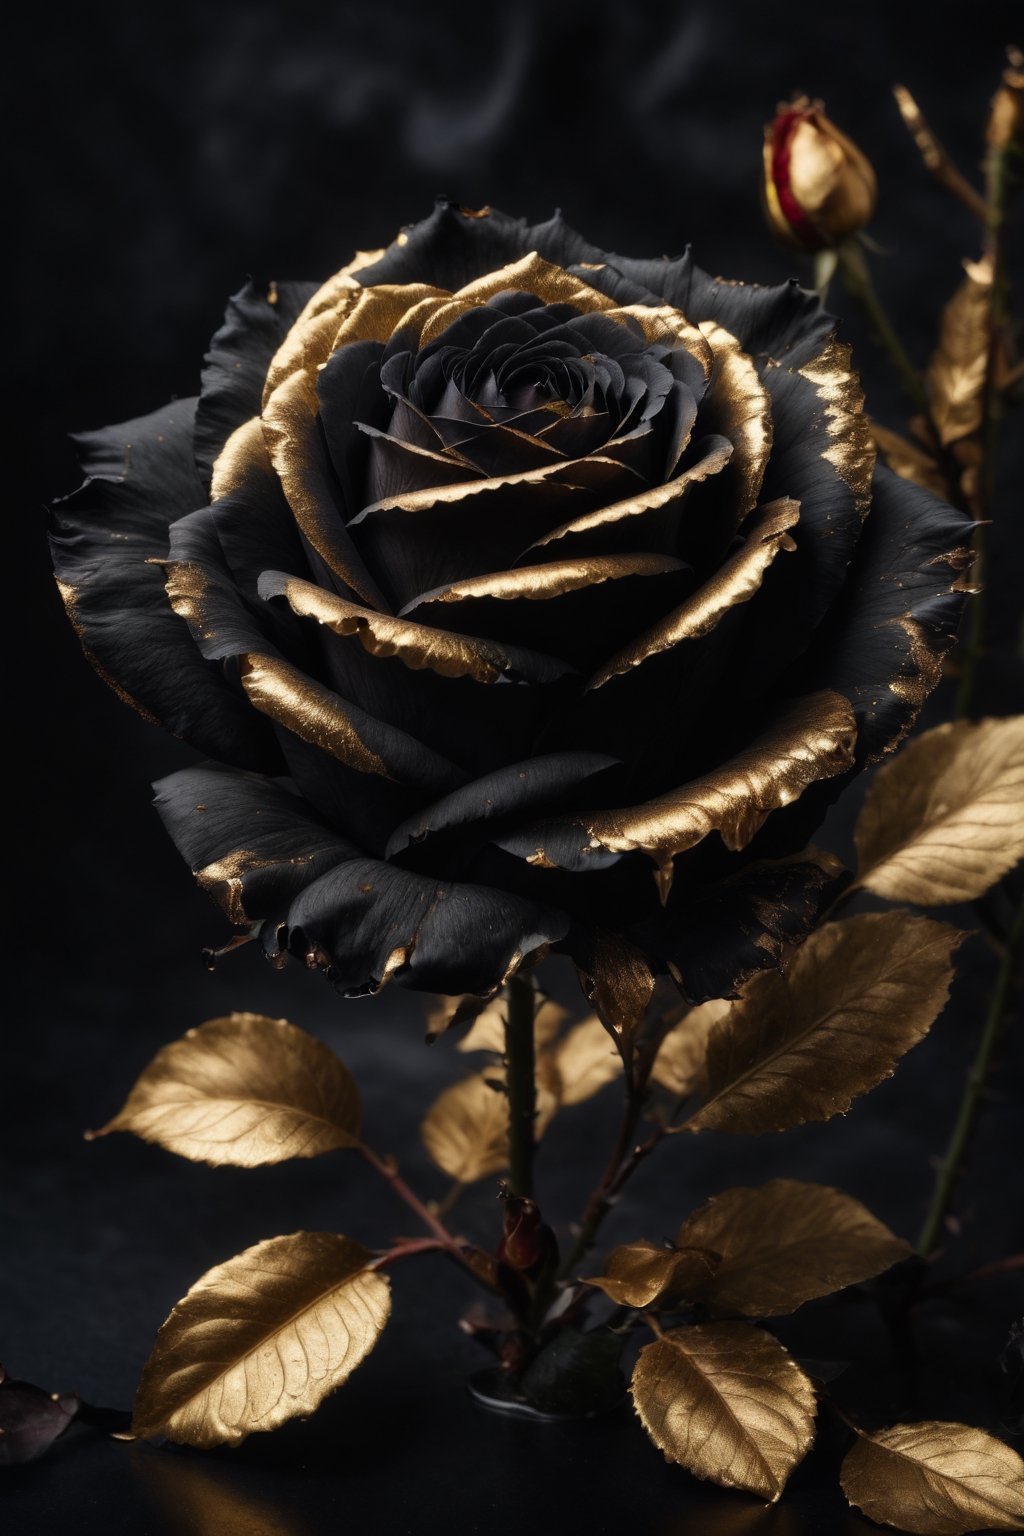 high speed photography, frozen in time, close up photo of a frozen rose the moment it's hit by a bullet and starts to shatter, partially shattered frozen rose, masterpiece, best quality,Gold Edged Black Rose